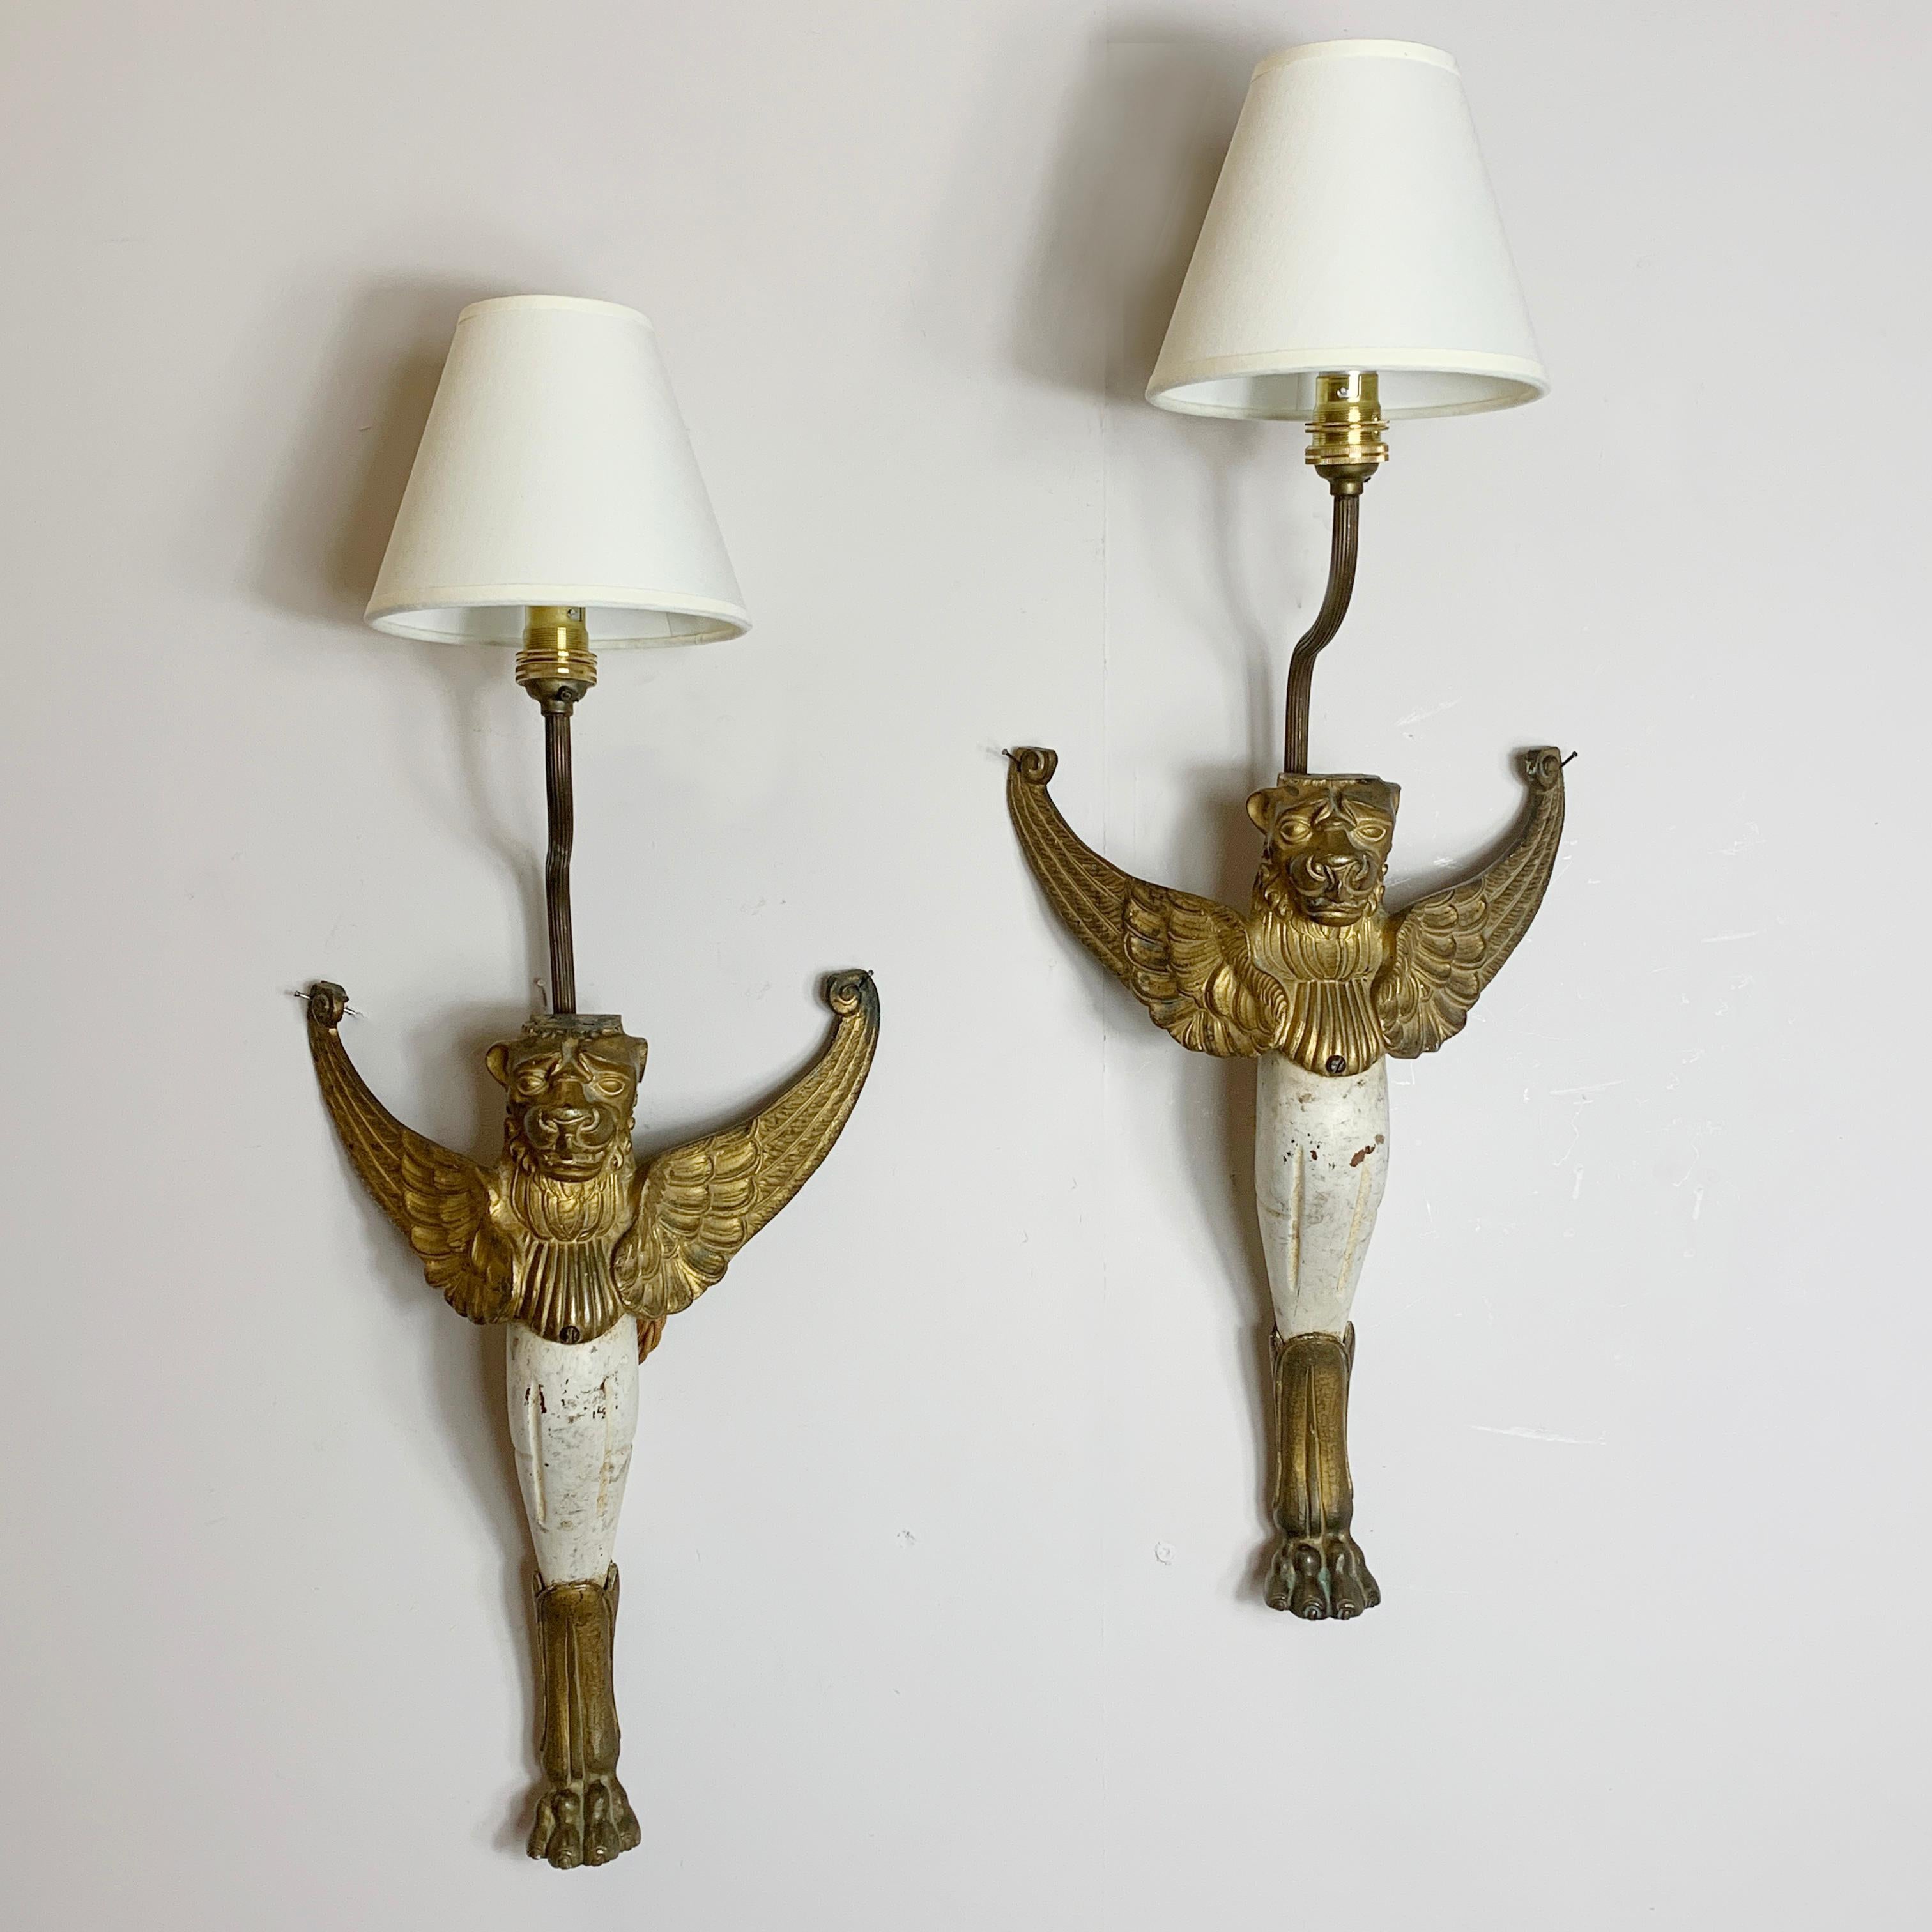 English Early 19th Century, Winged Griffin Wall Lights